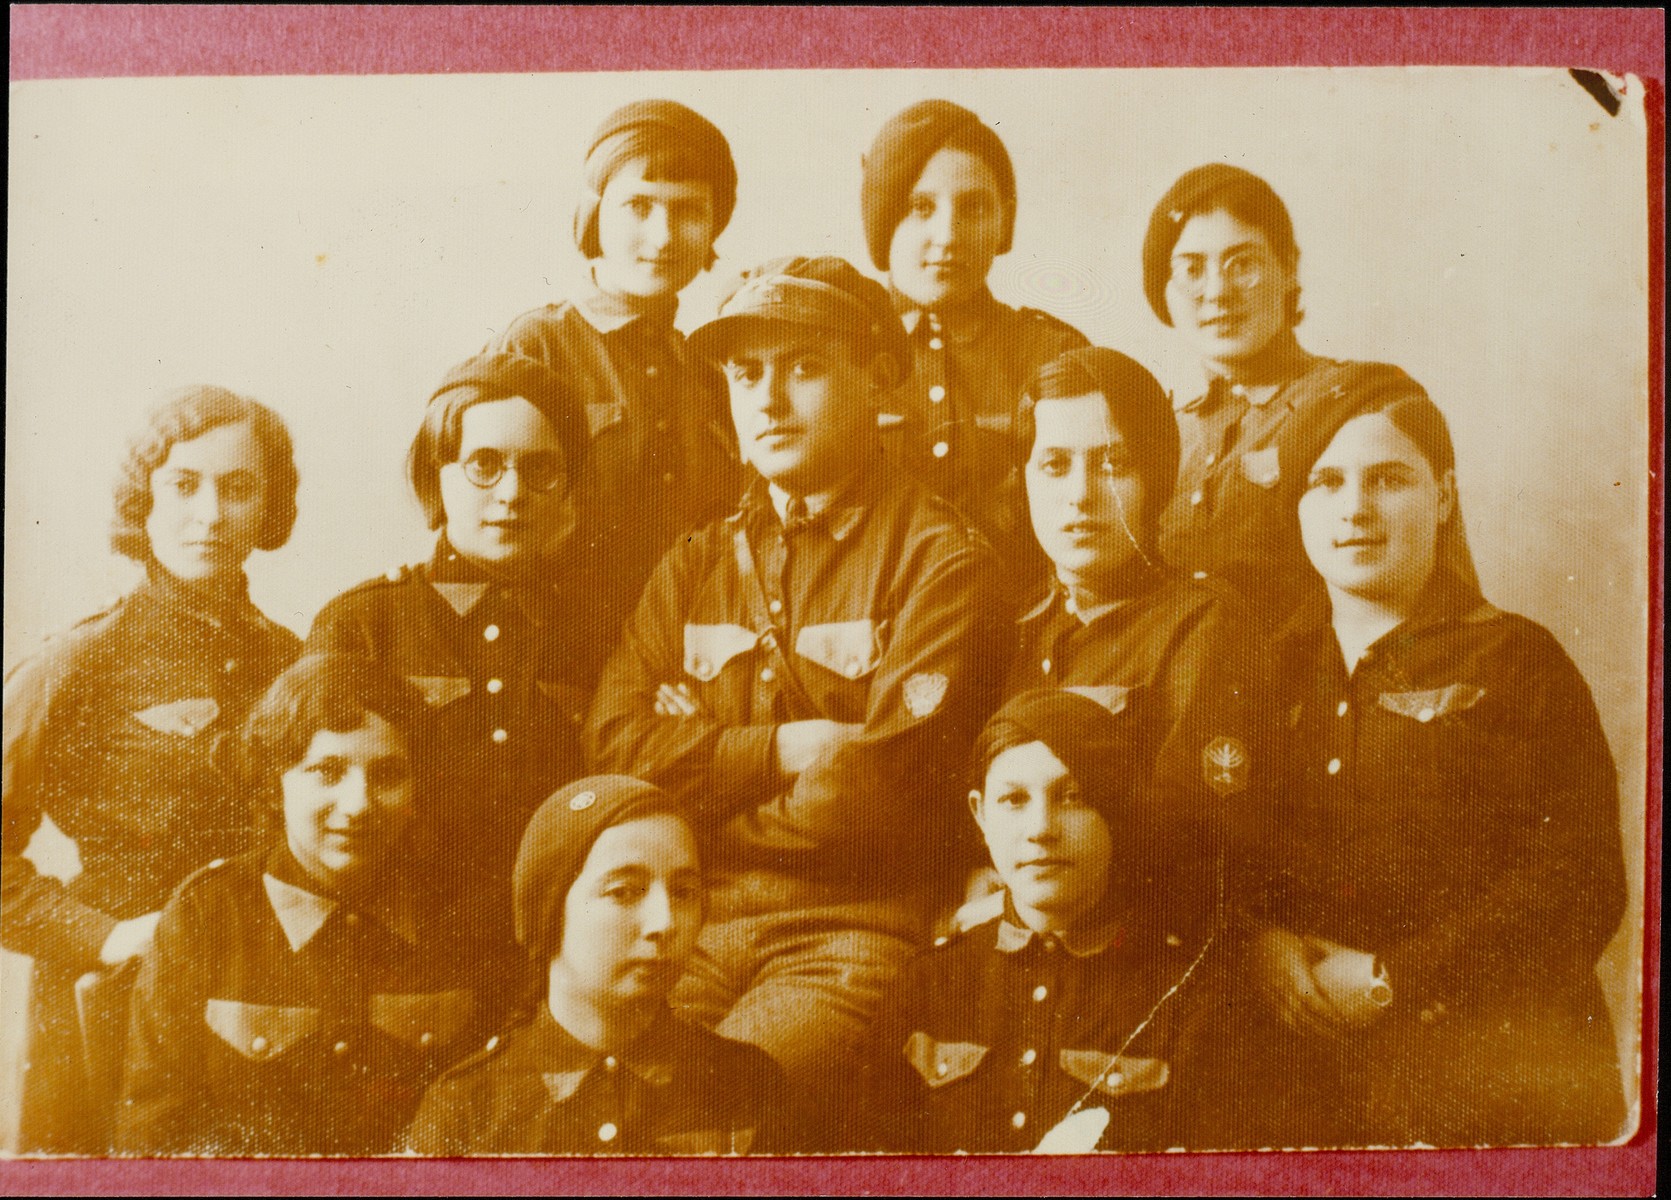 Members of the Betar Zionist youth group. 

Pictured include Shoshana and Tzipora Hutner.